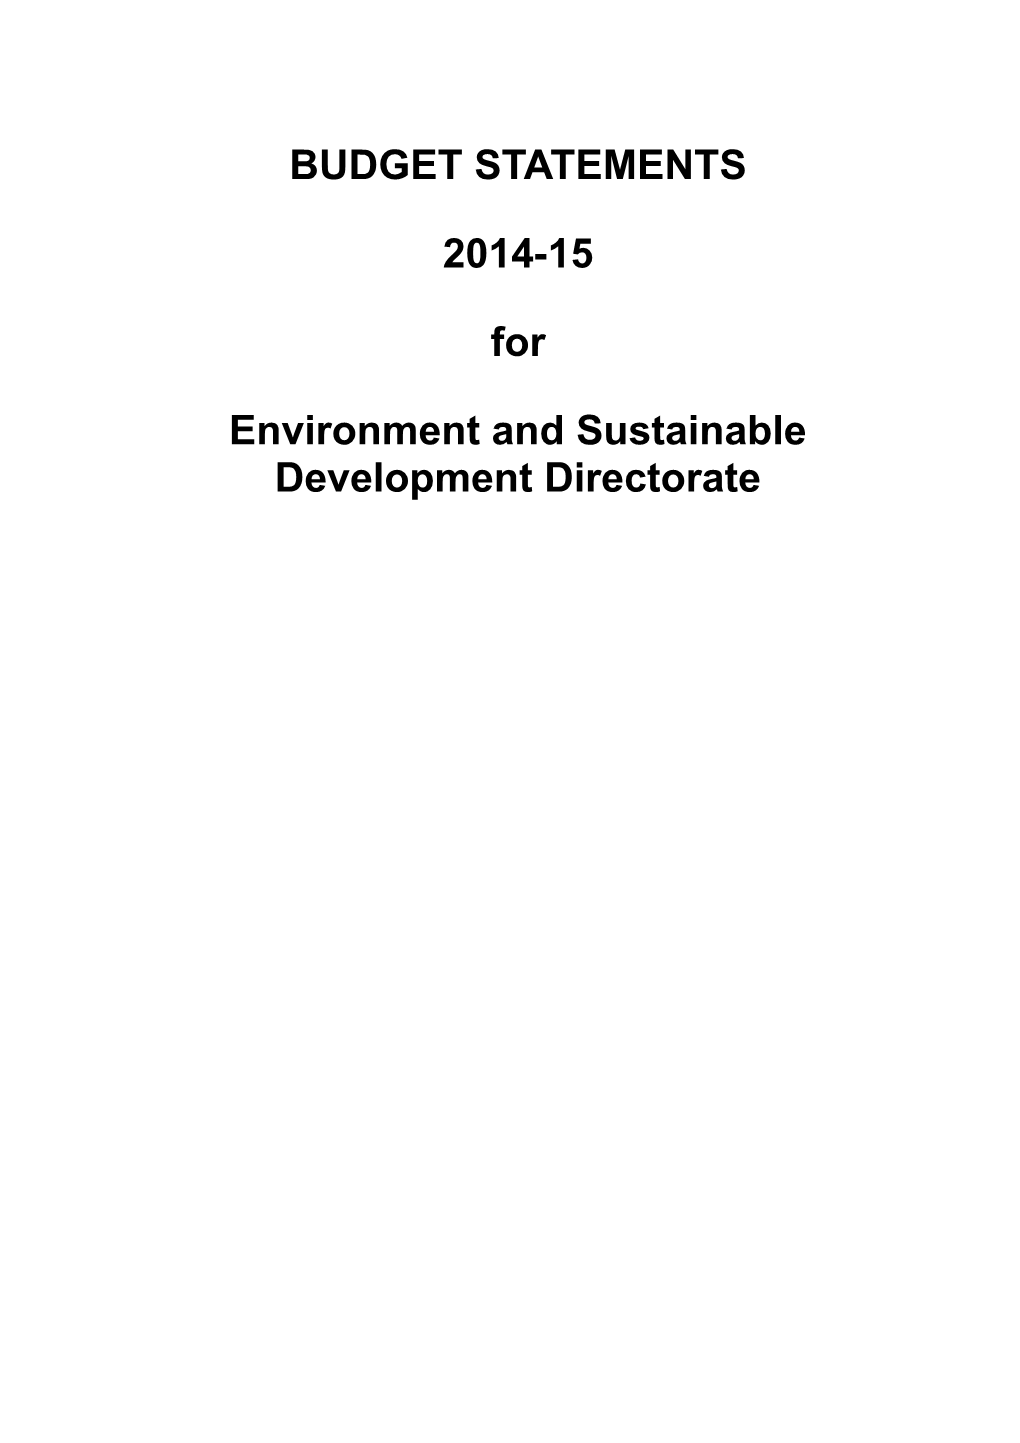 2013-14 Environment and Sustainable Development Directorate Budget Statement